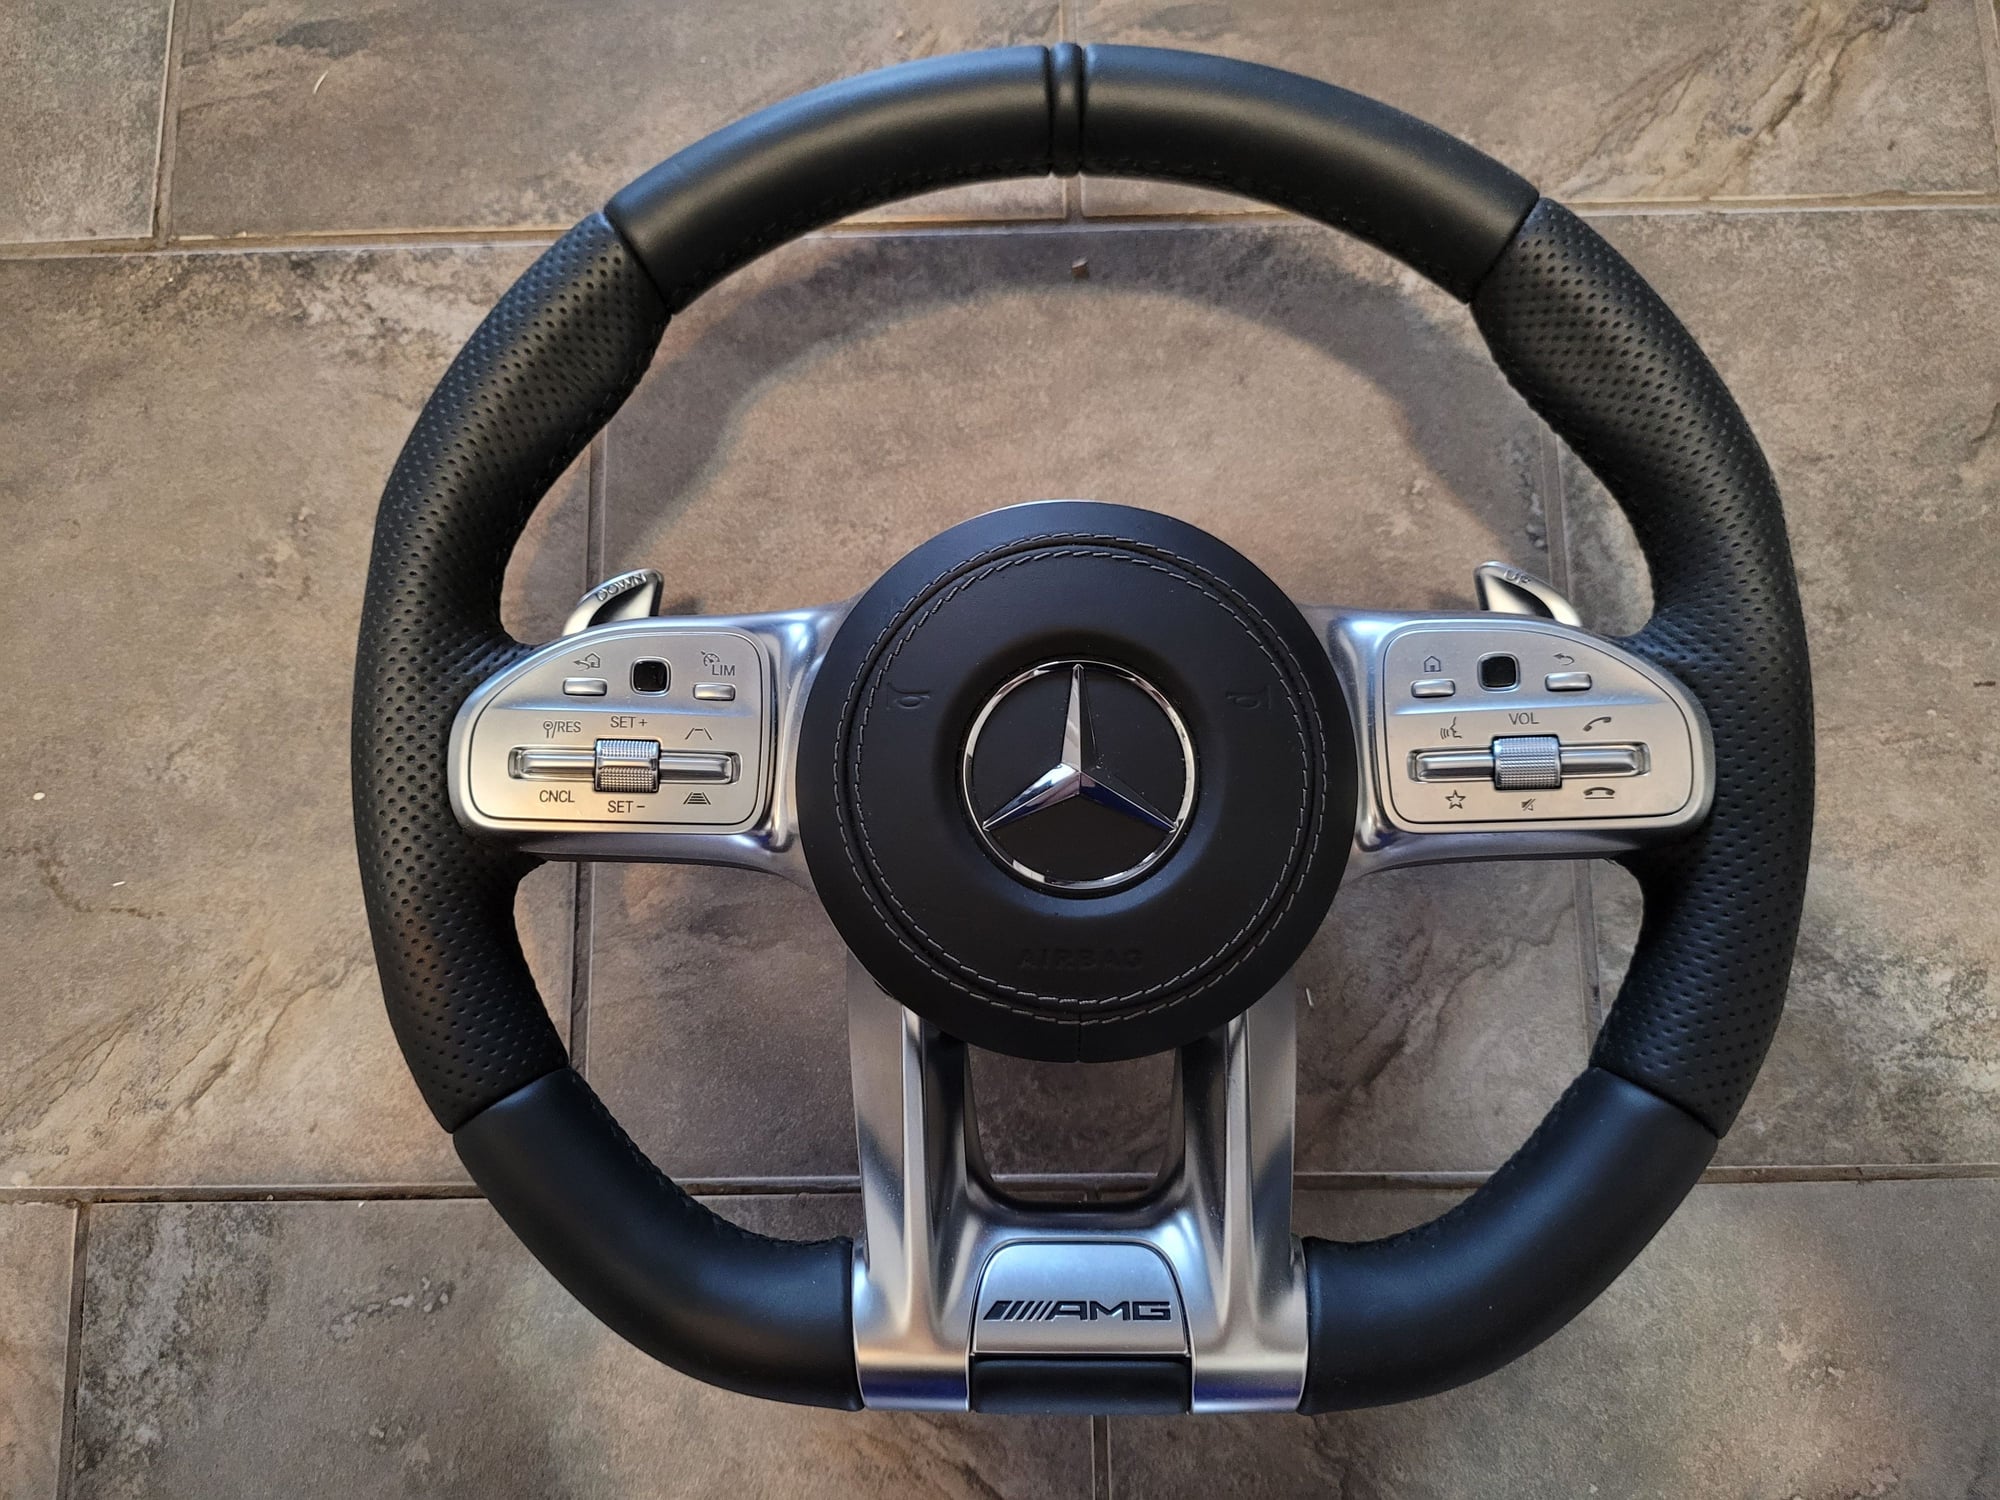 Interior/Upholstery - 2018 - 2020 W222 S63 AMG Heated Steering Wheel Complete with Pre-Facelift Module - New - 2014 to 2020 Mercedes-Benz S63 AMG - Niagara Falls, NY 14302, United States